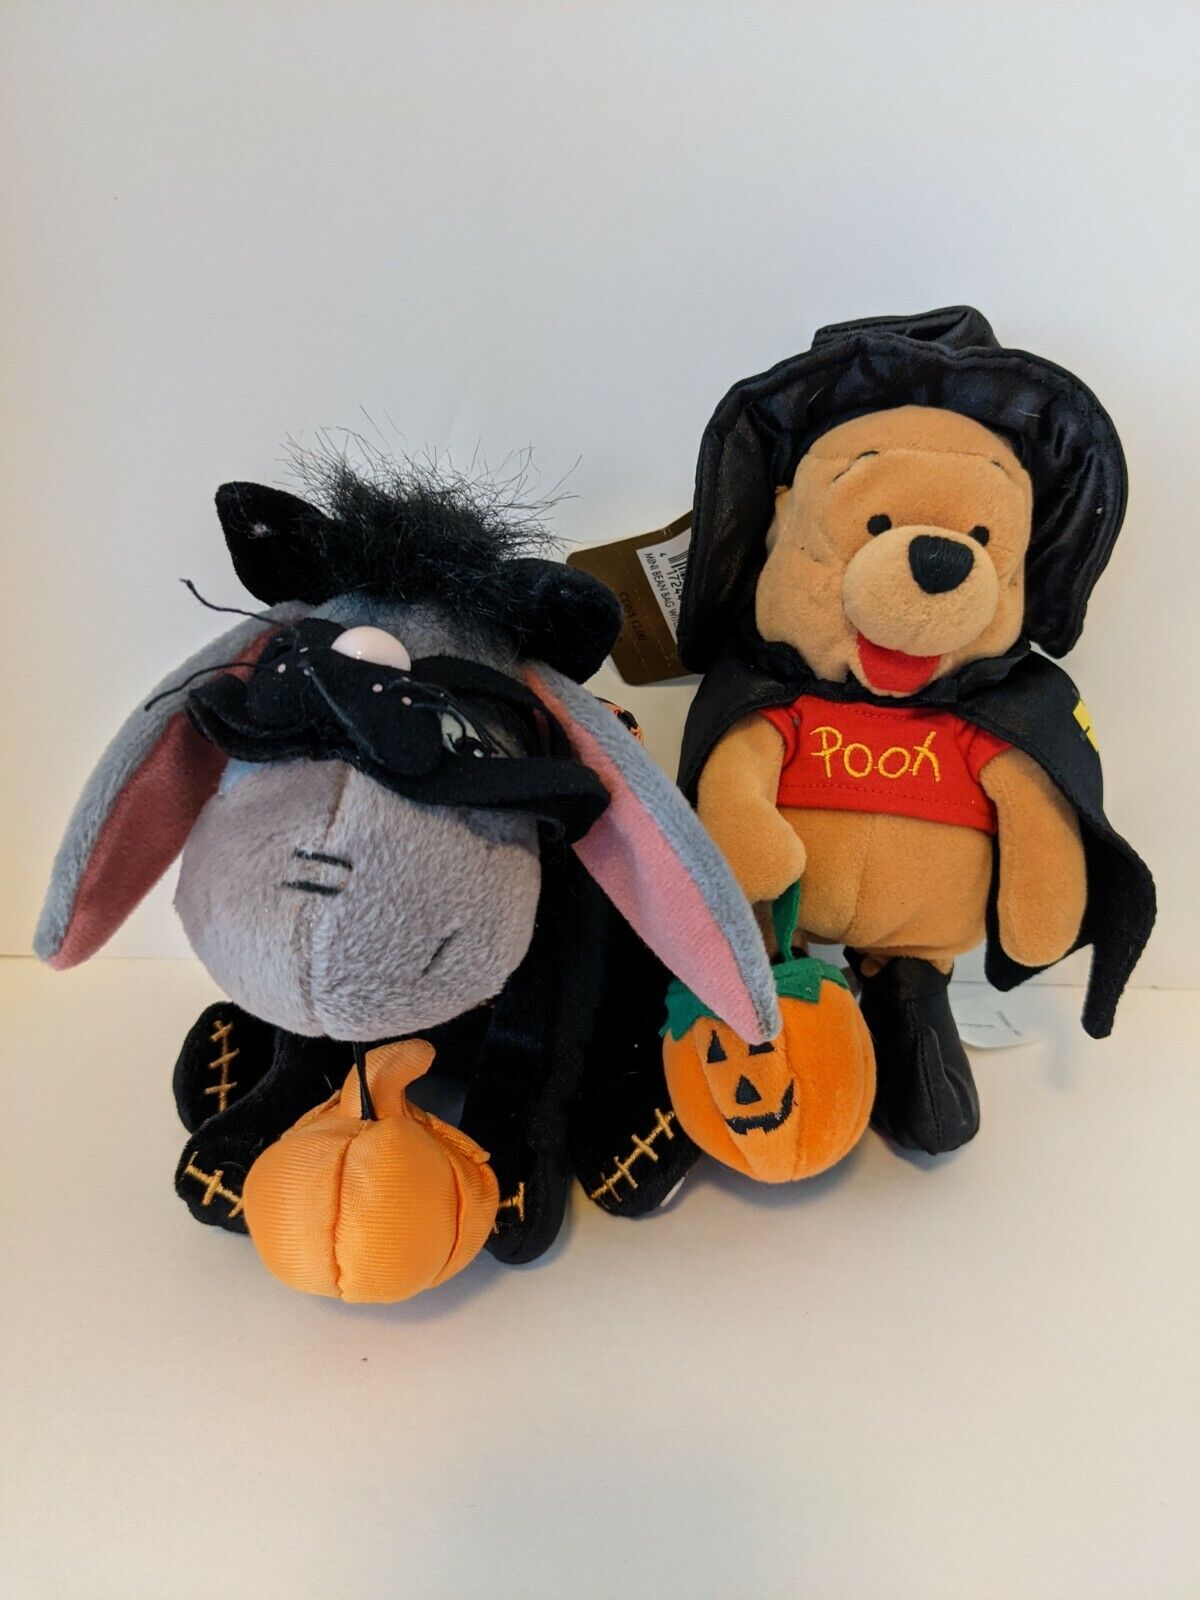 Disney Milwaukee Mall 2002 Cat Eeyore Sale Special Price And Witch 2000 Plush Set Poo